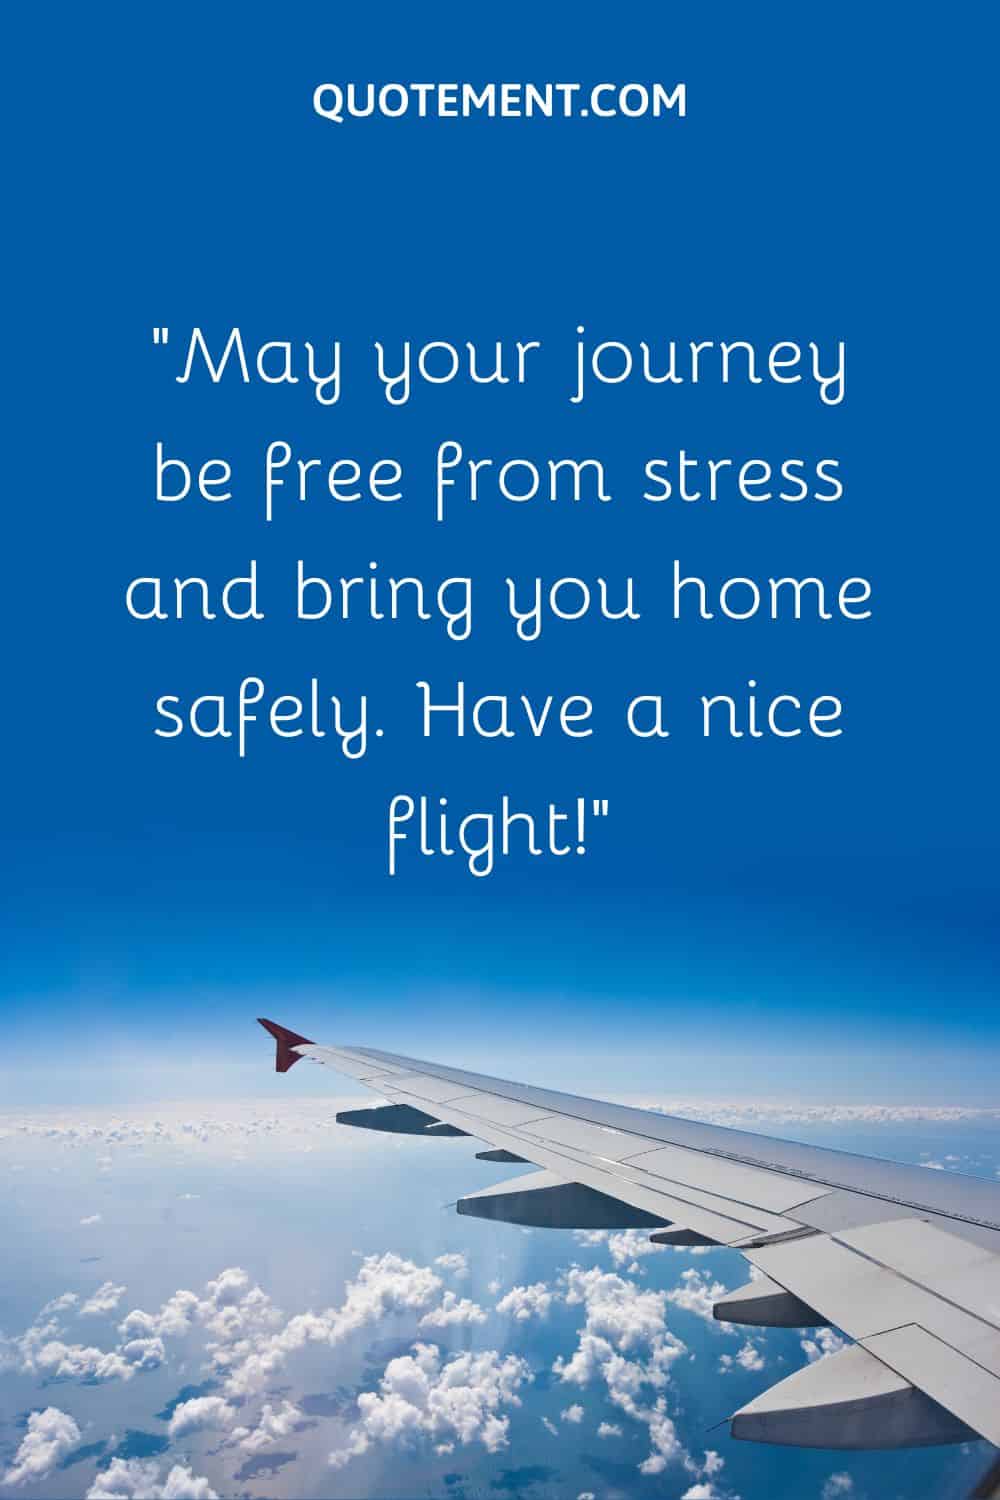 May your journey be free from stress and bring you home safely.